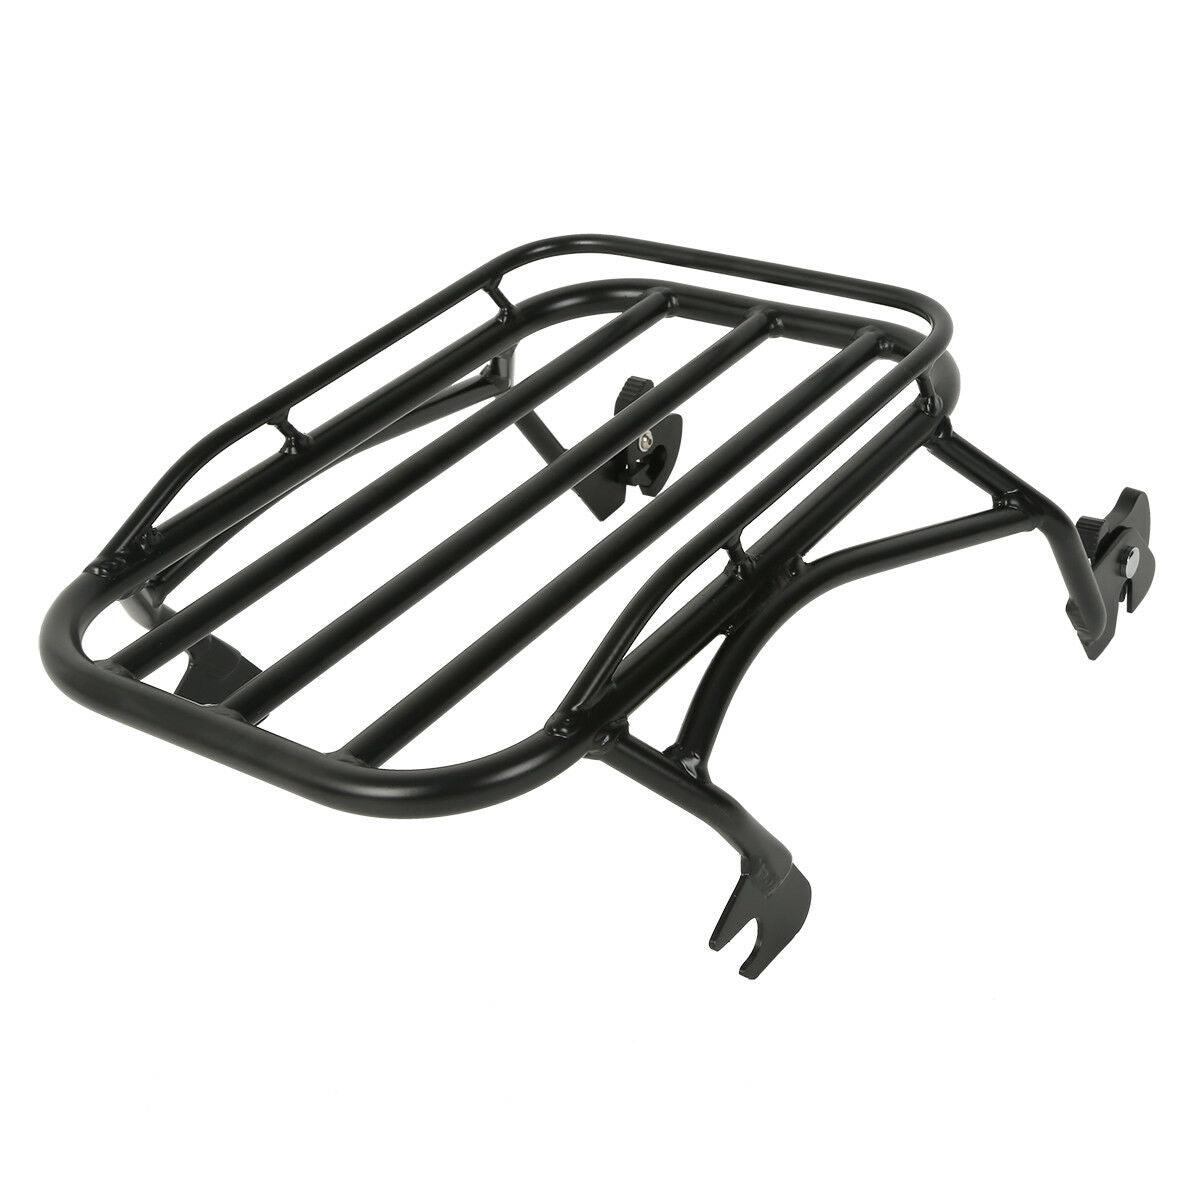 Dull Black Detachable Solo Luggage Mounting Rack Fit For Harley Road King 97-08 - Moto Life Products